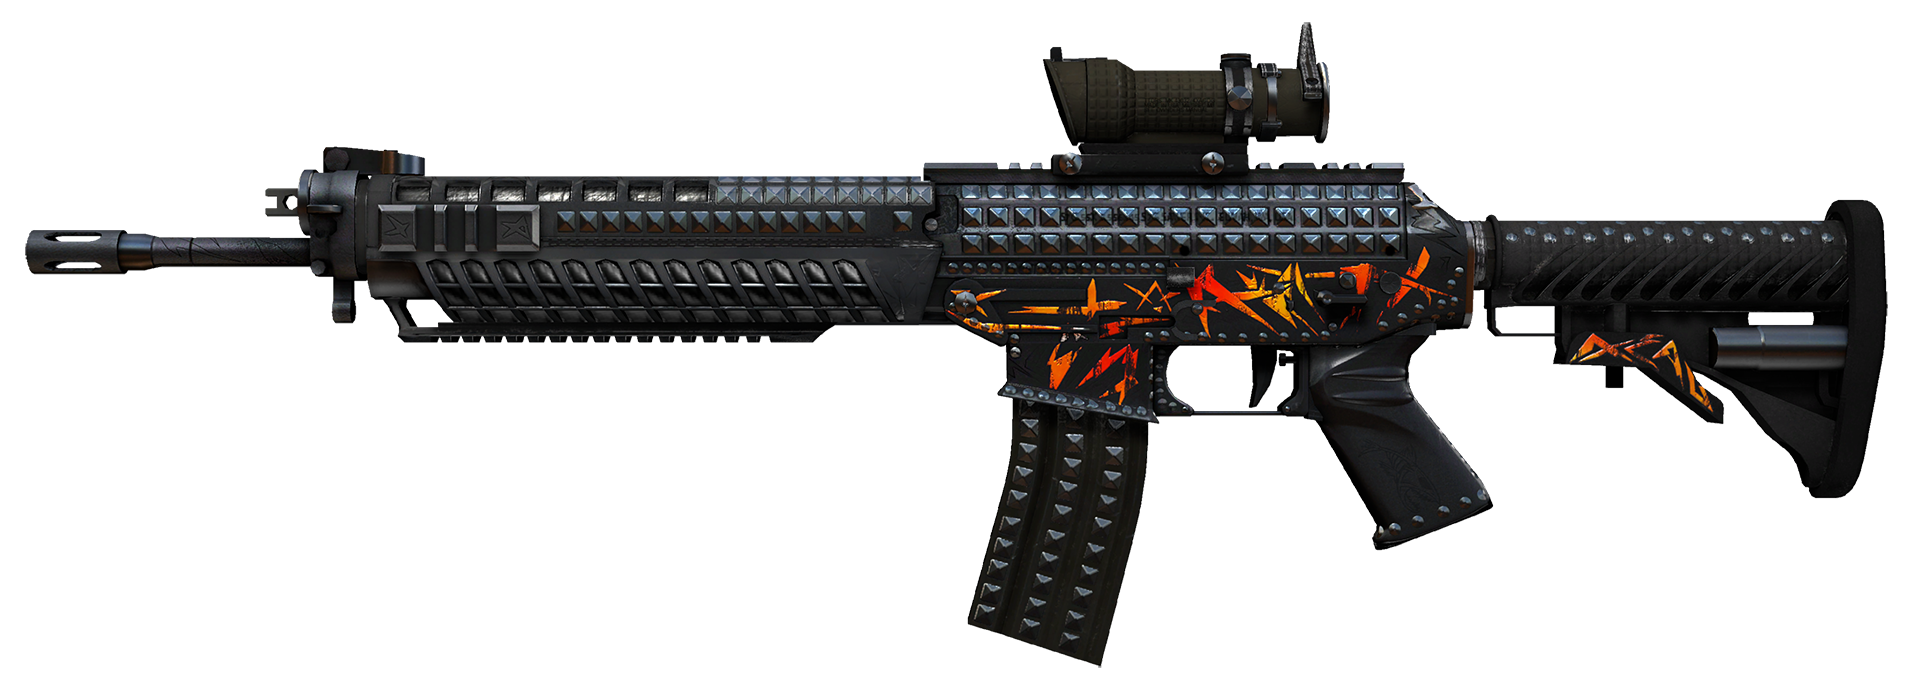 SG 553 Aerial cs go skin instal the new version for ipod